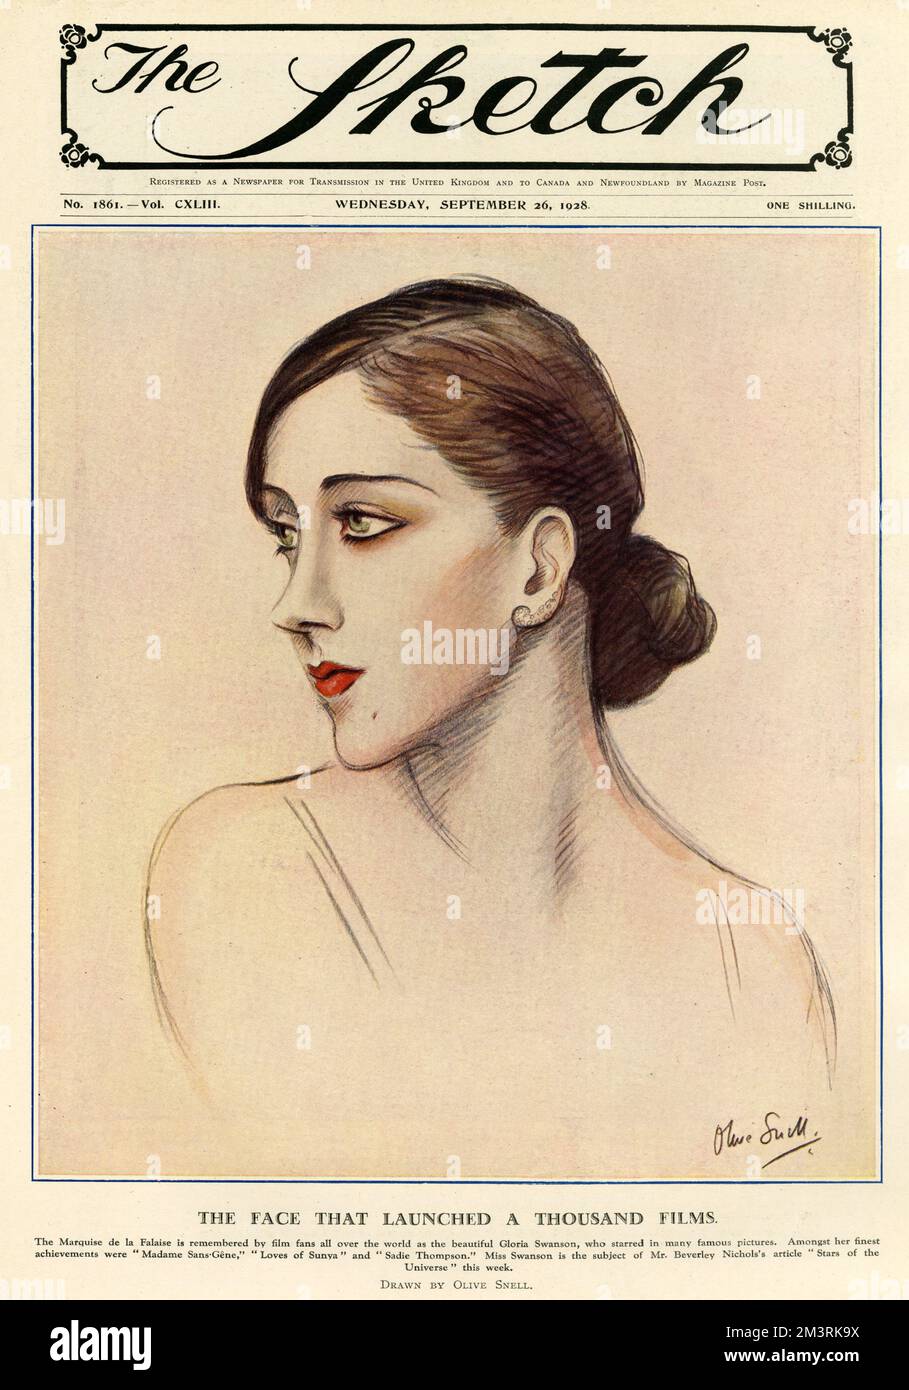 Actress Gloria Swanson (1899-1983) depicted on the front cover of The Sketch magazine. At the time she was married to Henry de la Falaise.   1928 Stock Photo